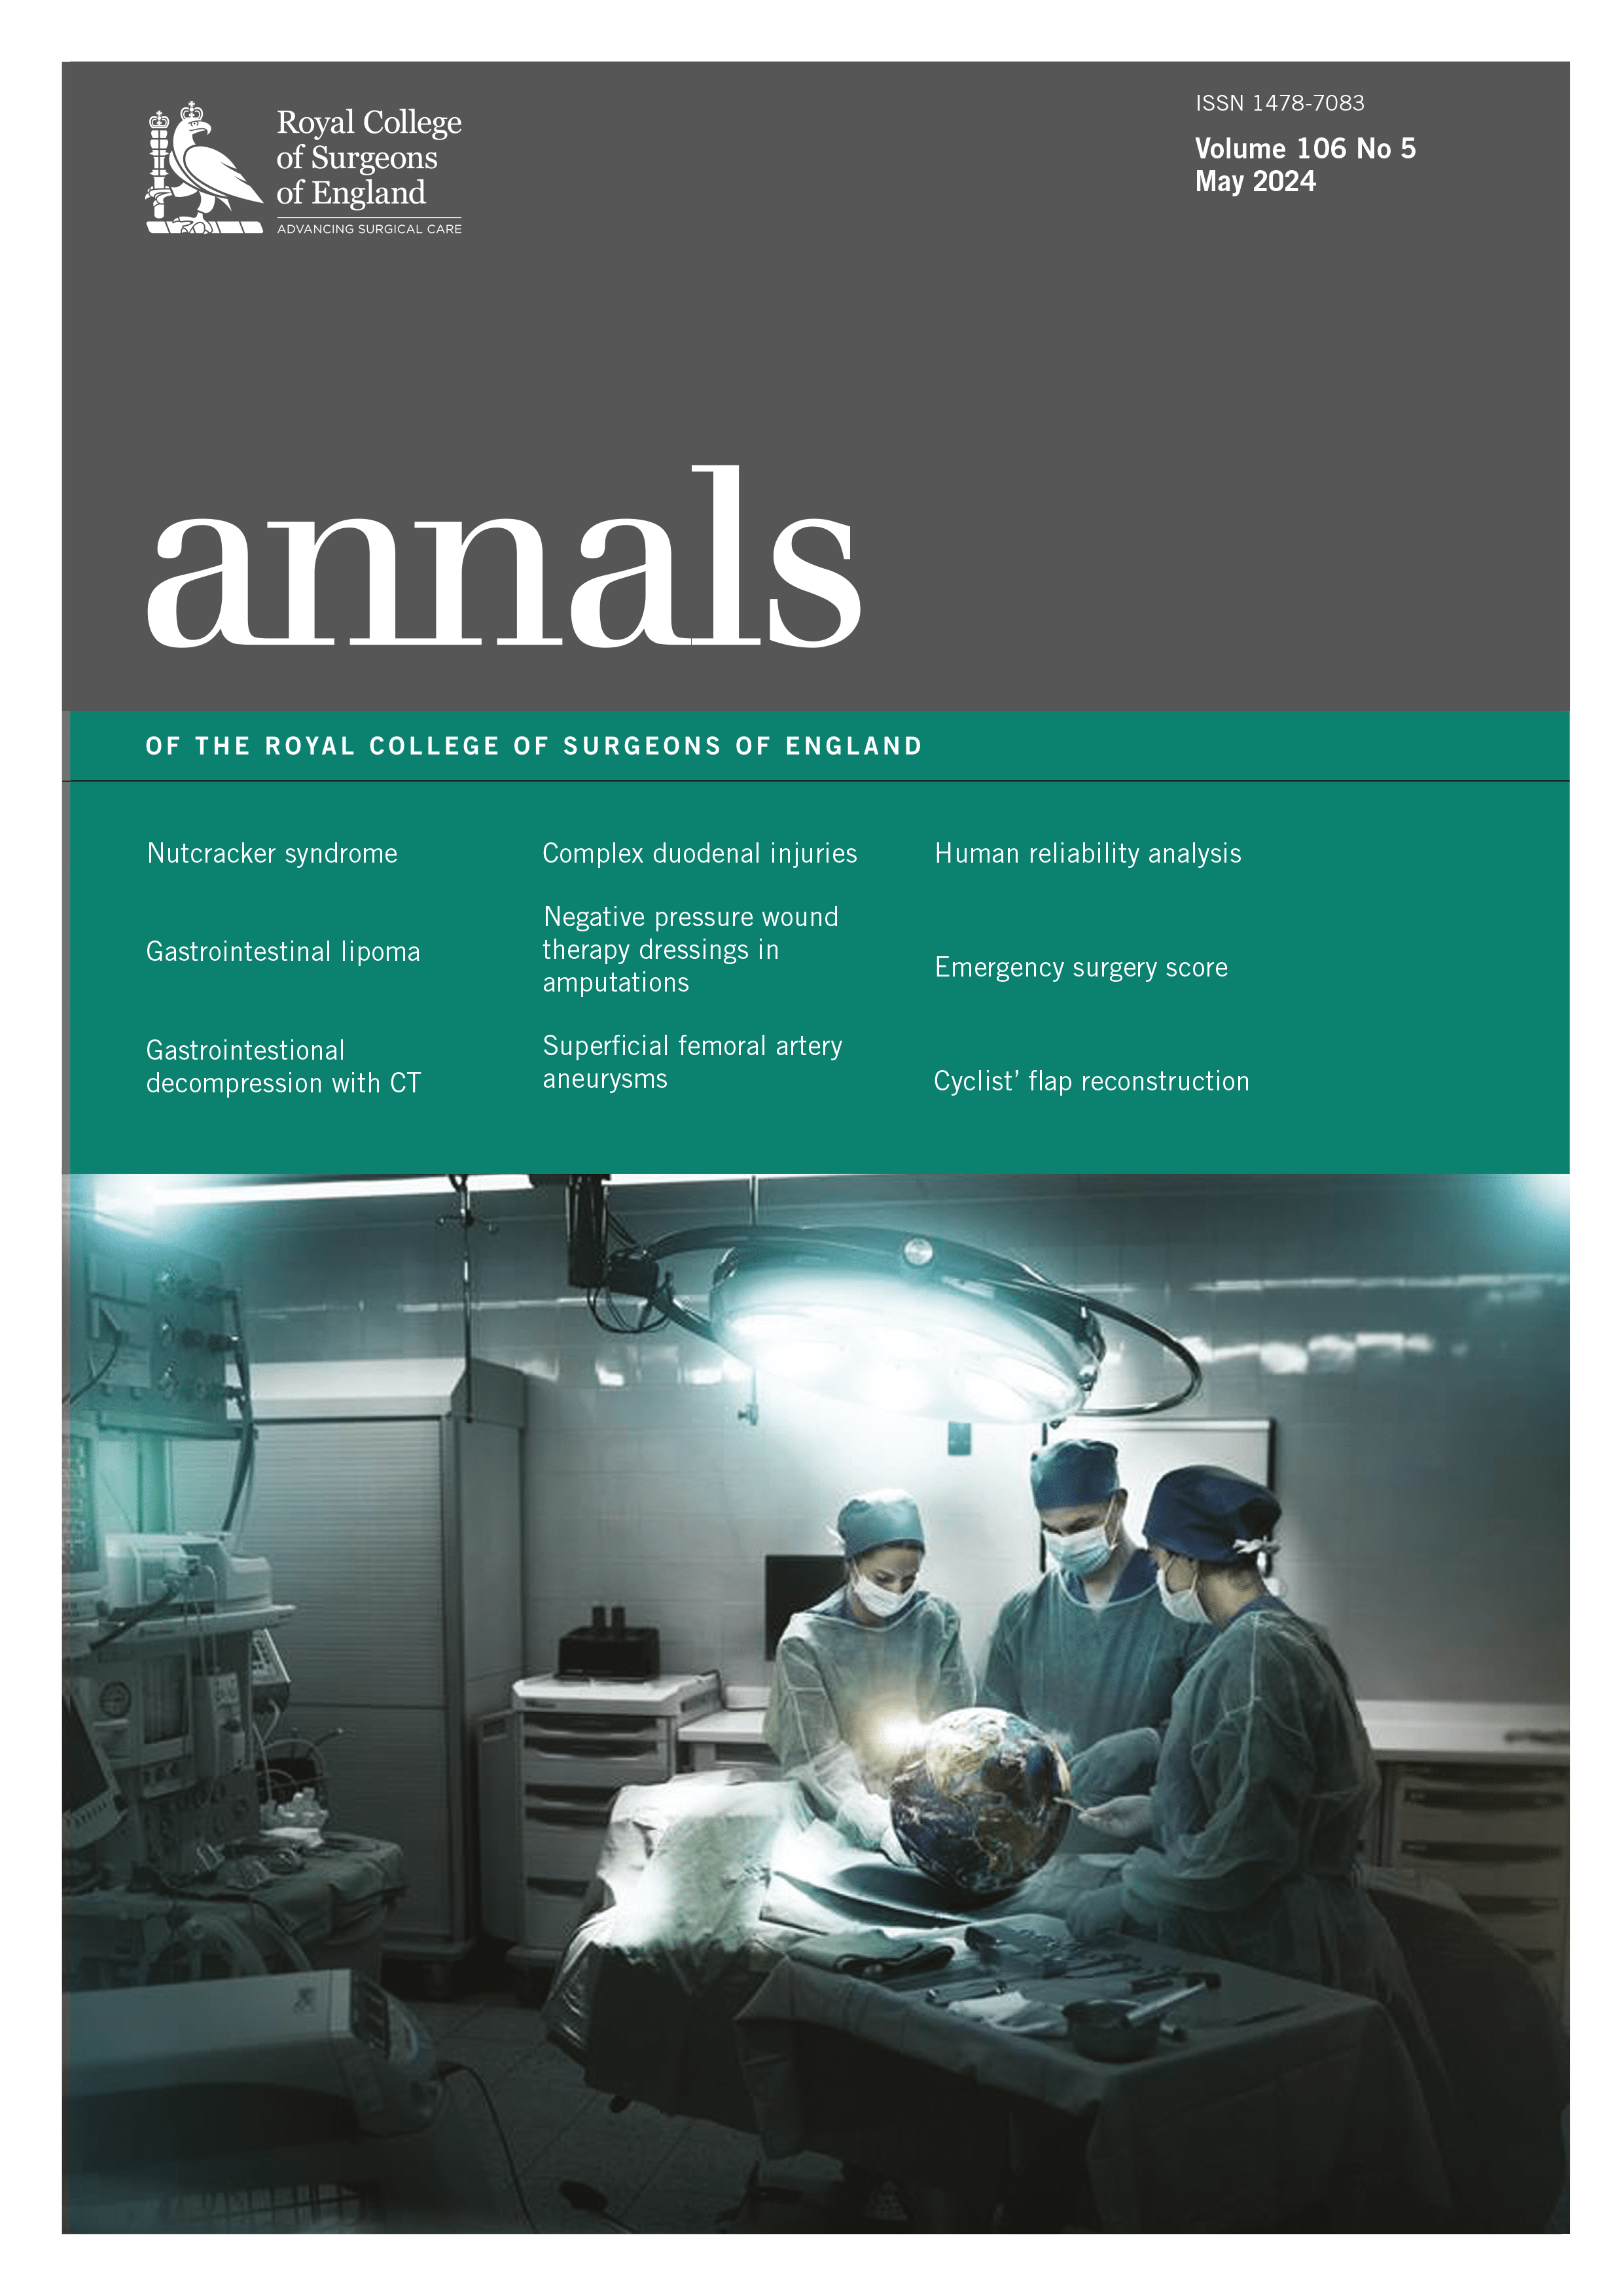 May 2020 Annals cover 